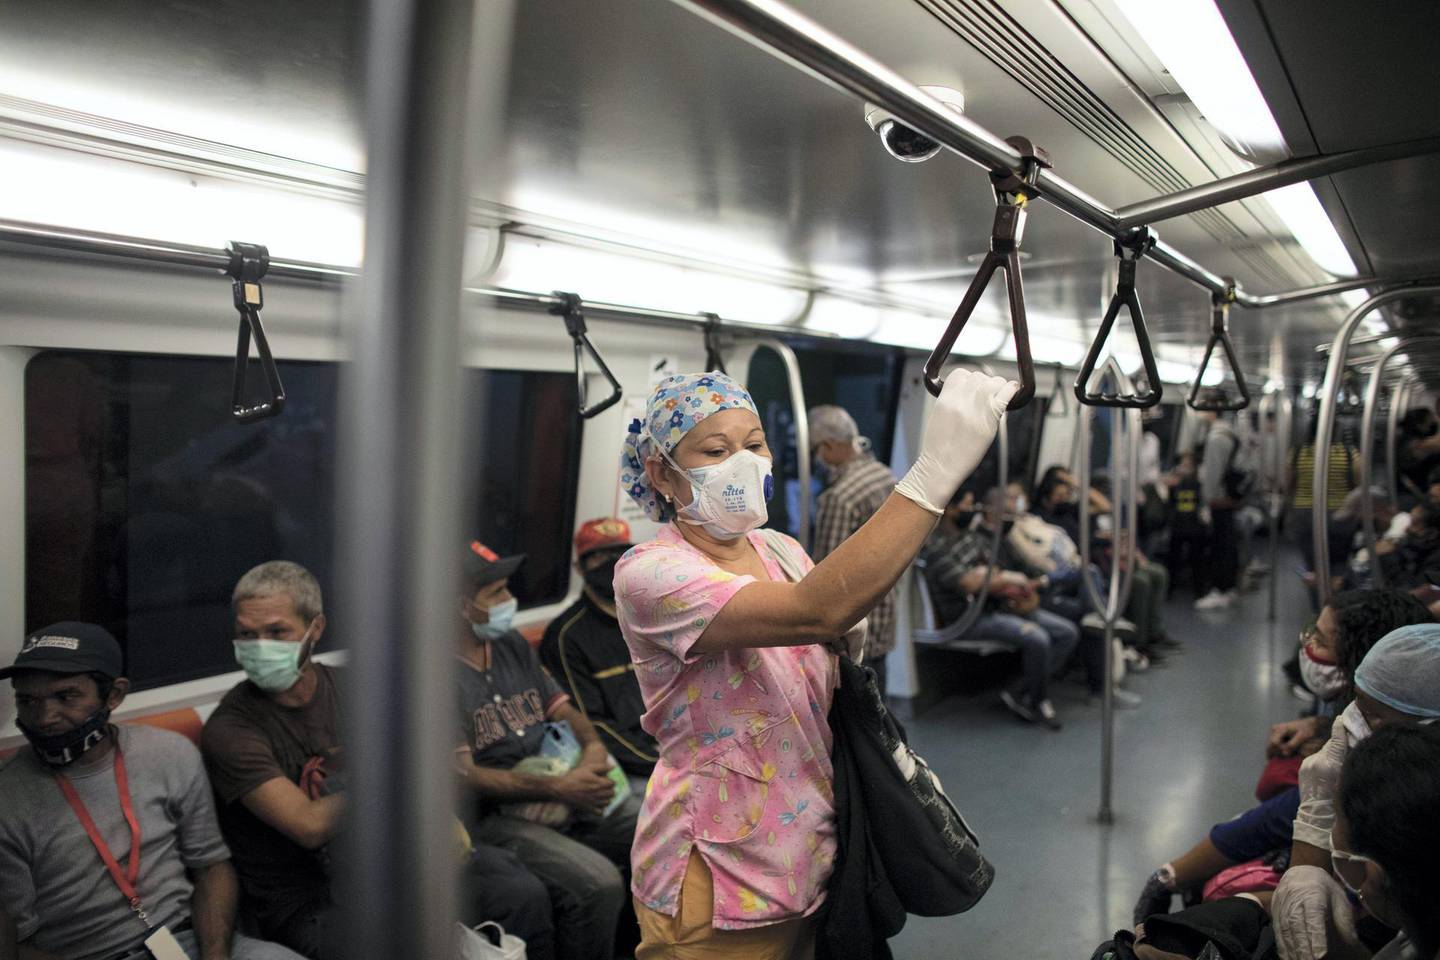 CARACAS, VENEZUELA - JUNE 26: Nurse Rosaura Rodriguez wearing a double mask and medical gloves, travels inside the subway to go home after work during week 17 of strict quarantine on June 26, 2020 in Caracas, Venezuela. Venezuelan nurse Rosaura Rodriguez has worked in public health institutions for 17 years. Since the beginning of the COVID-19 outbreak, she works seven days a week for minimum wage (4USD). Rodriguez wakes up every day at 3:30 AM, and then has a two hour commute from her house in the Petare slum to the health center Alcides Rodriguez. She takes care of patients with symptoms of COVID-19 and says most people do not understand the real danger of the pandemic. Back home, she undergoes daily disinfection rituals to protect her son and grandson, who live with her. As most people in Caracas, she suffers running water shortage and has to fill buckets in a public tap. Social and economic crisis in the country do not help and people must go out to work or to get drinking water, unable to obey the obligatory isolation ordered by Maduro's government. (Photo by Leonardo Fernandez Viloria/Getty Images)